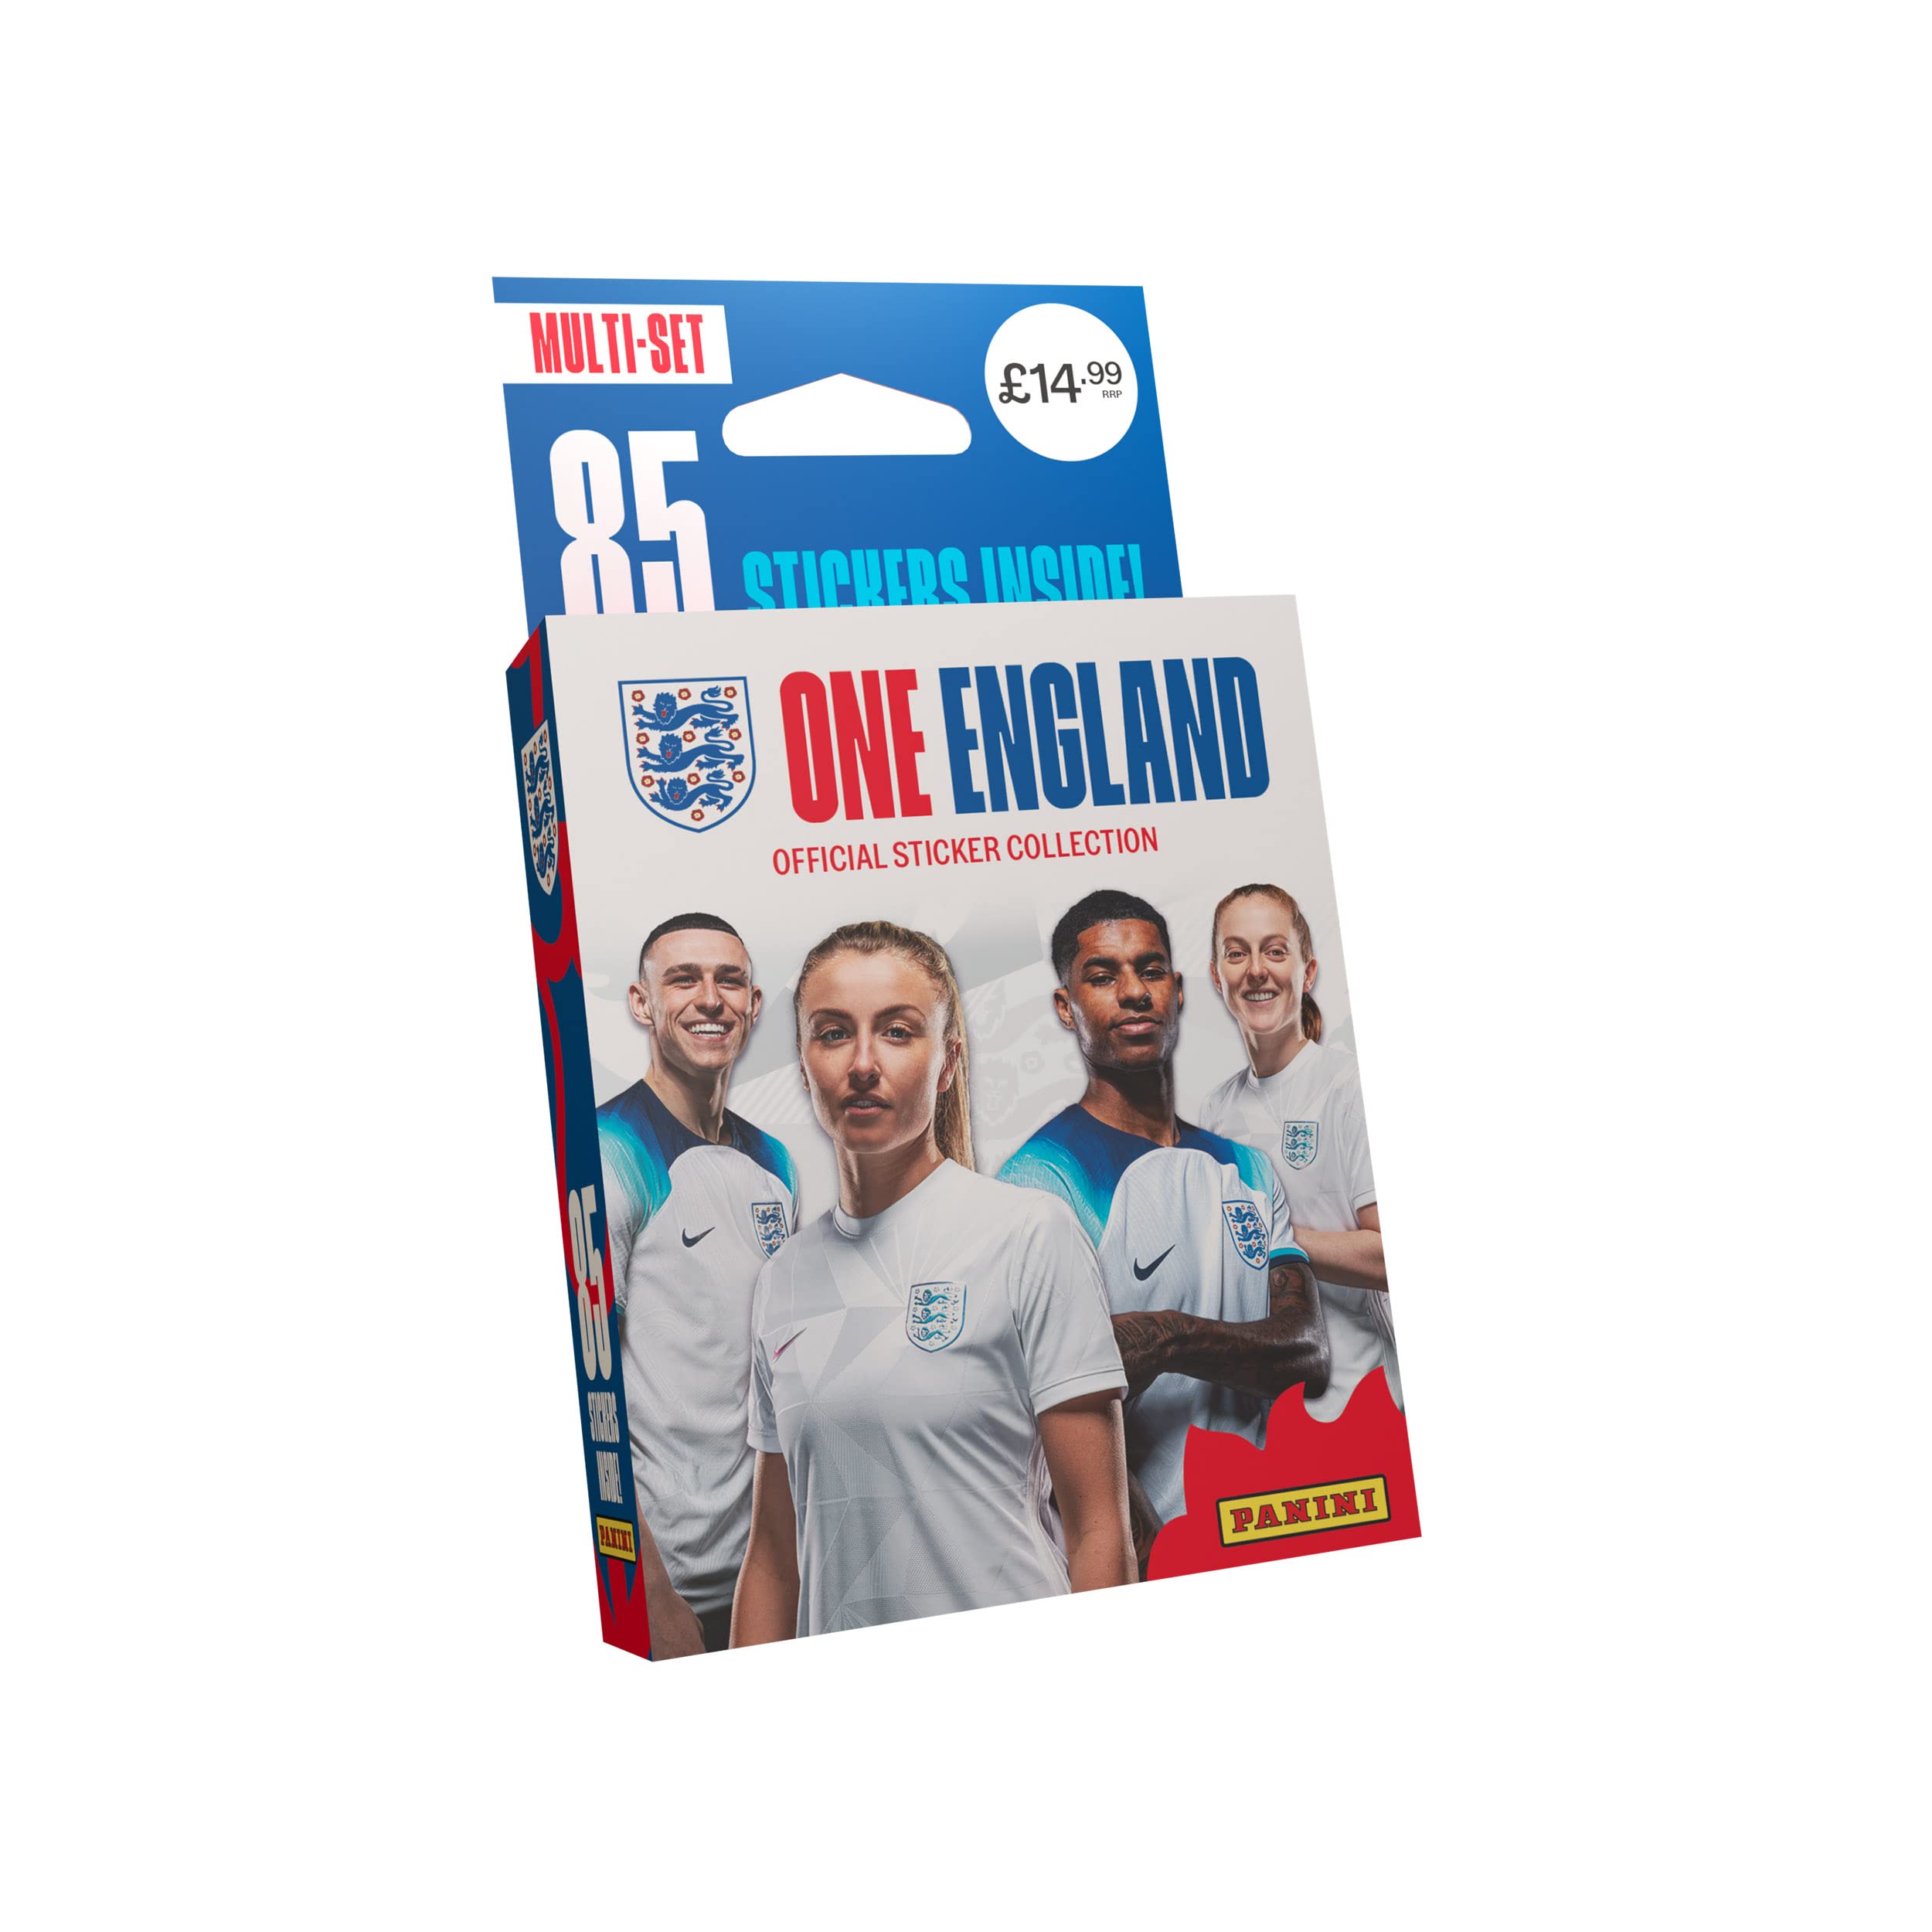 One England Sticker Collection Multiset